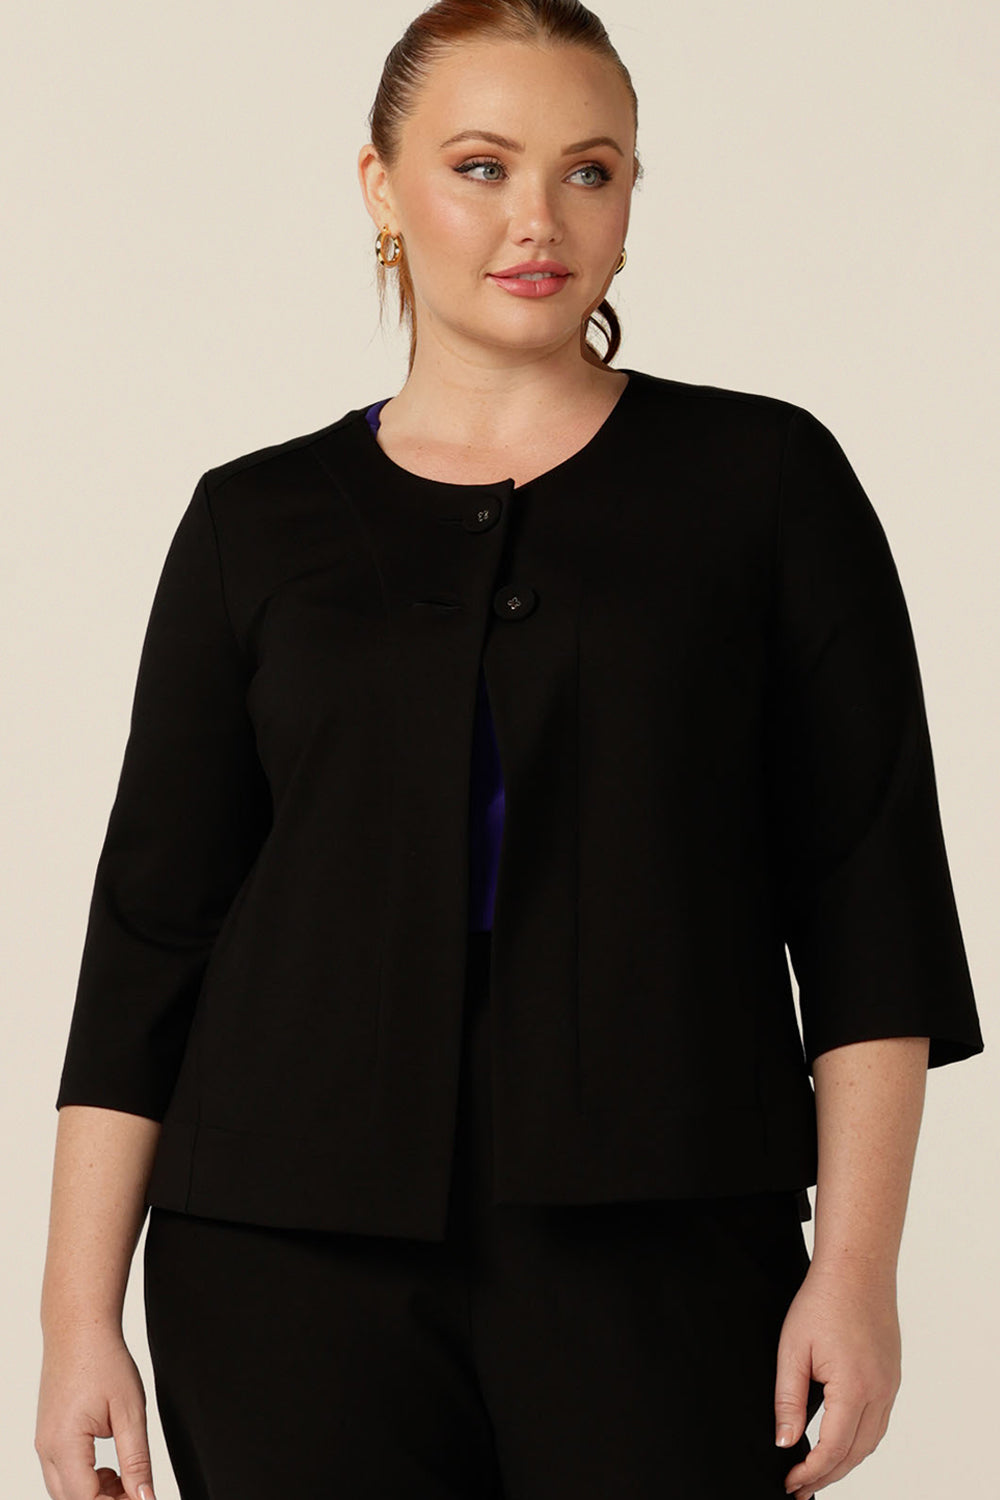 A size 12 woman wears a round neck, collarless jacket with 3/4 sleeves. In black ponte jersey, this comfortable jacket comes in an inclusive size range for petite to plus size women.